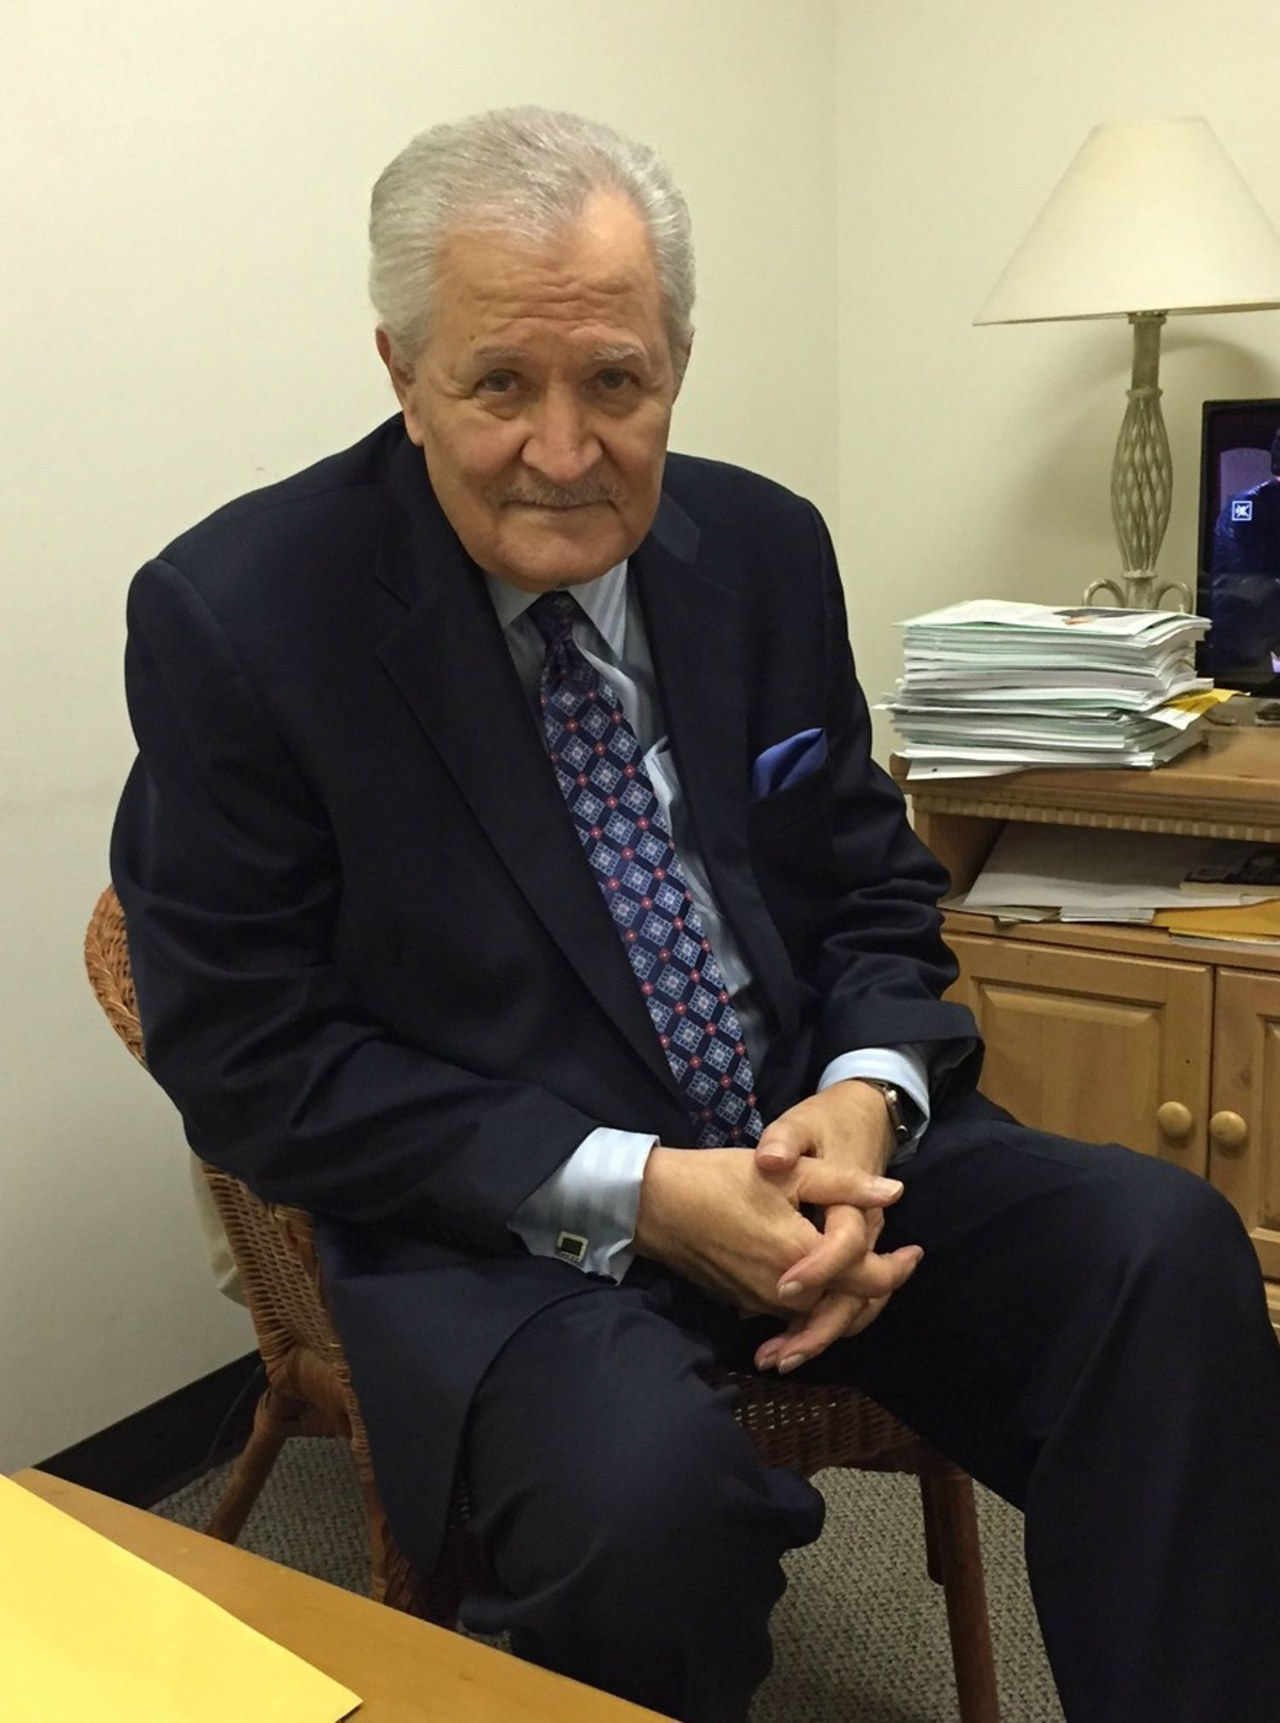 John aniston days of our lives 2015